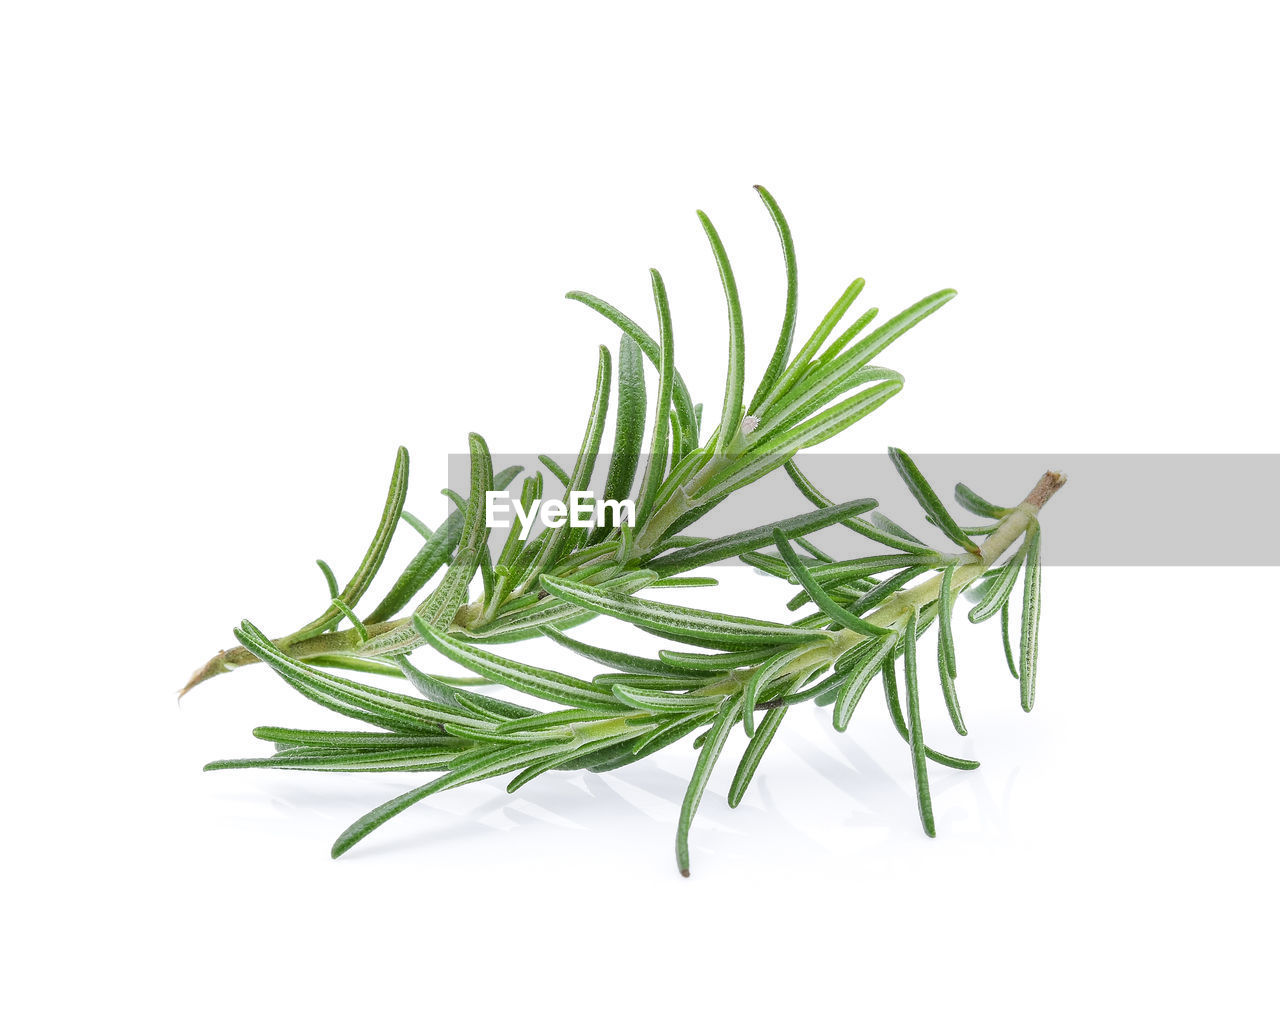 Close-up of rosemary leaves against white background